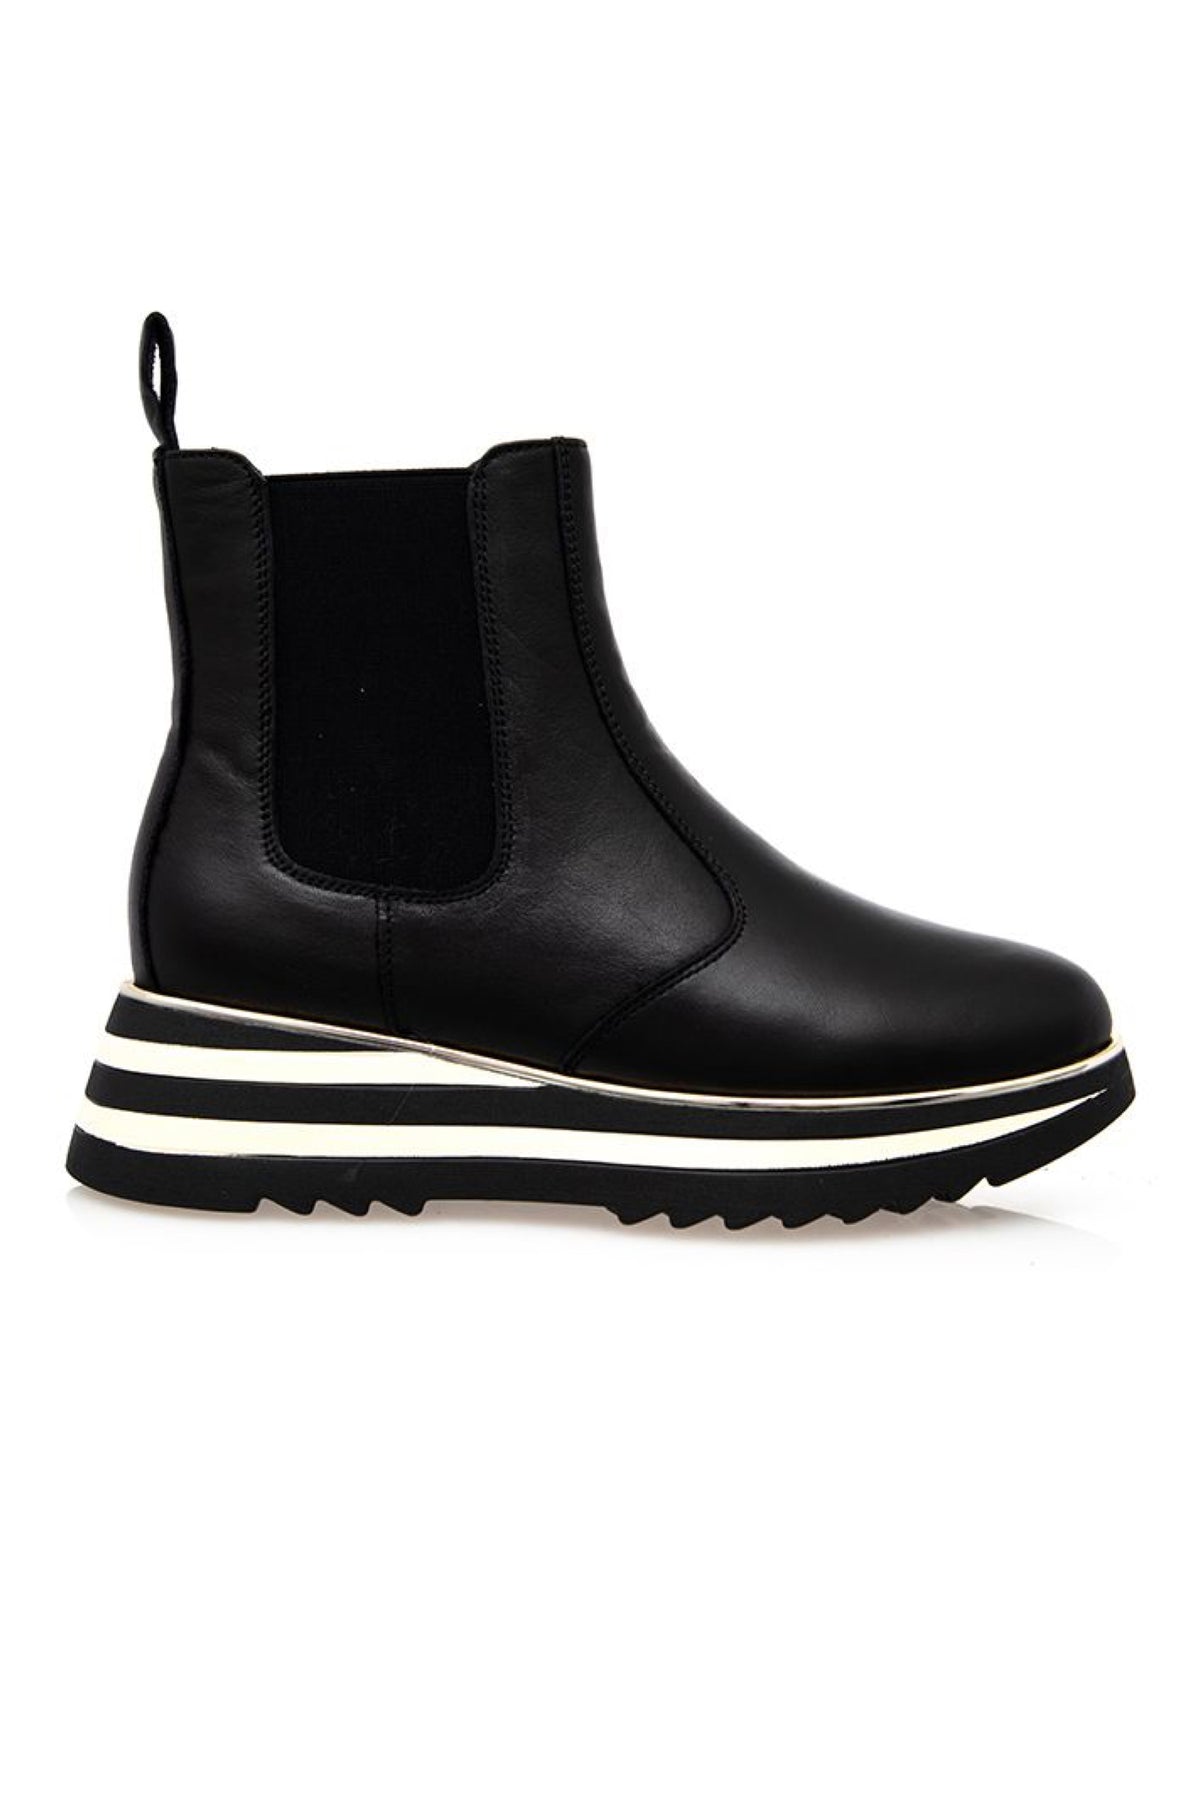 Hiccup Boot Black